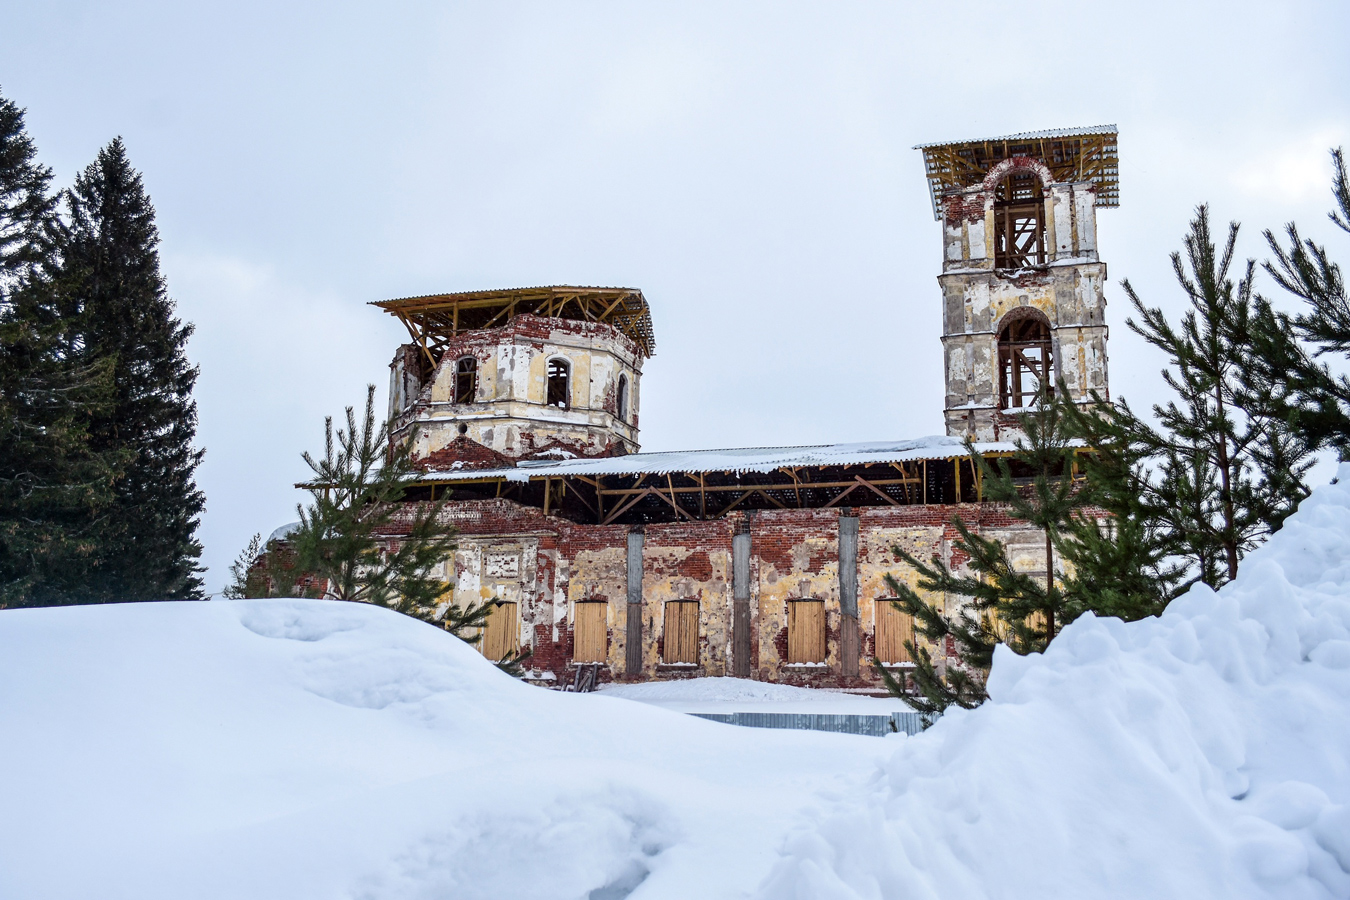 March 25, 2022. Tulema. Ruins of the orthodox church